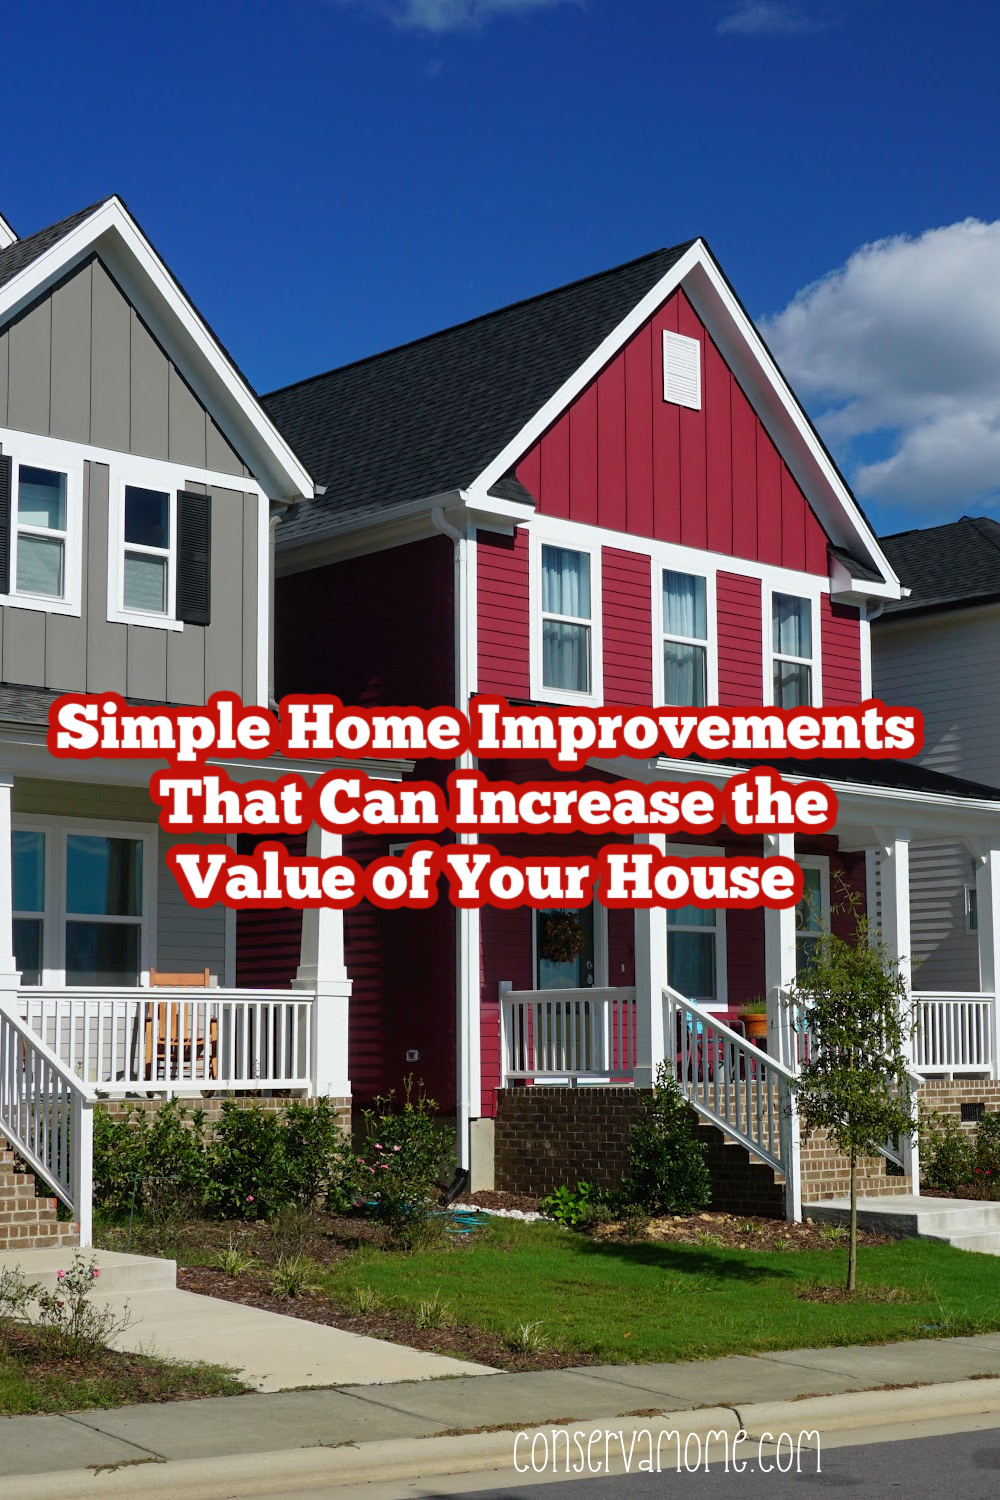 Simple Home Improvements That Can Increase the Value of Your House